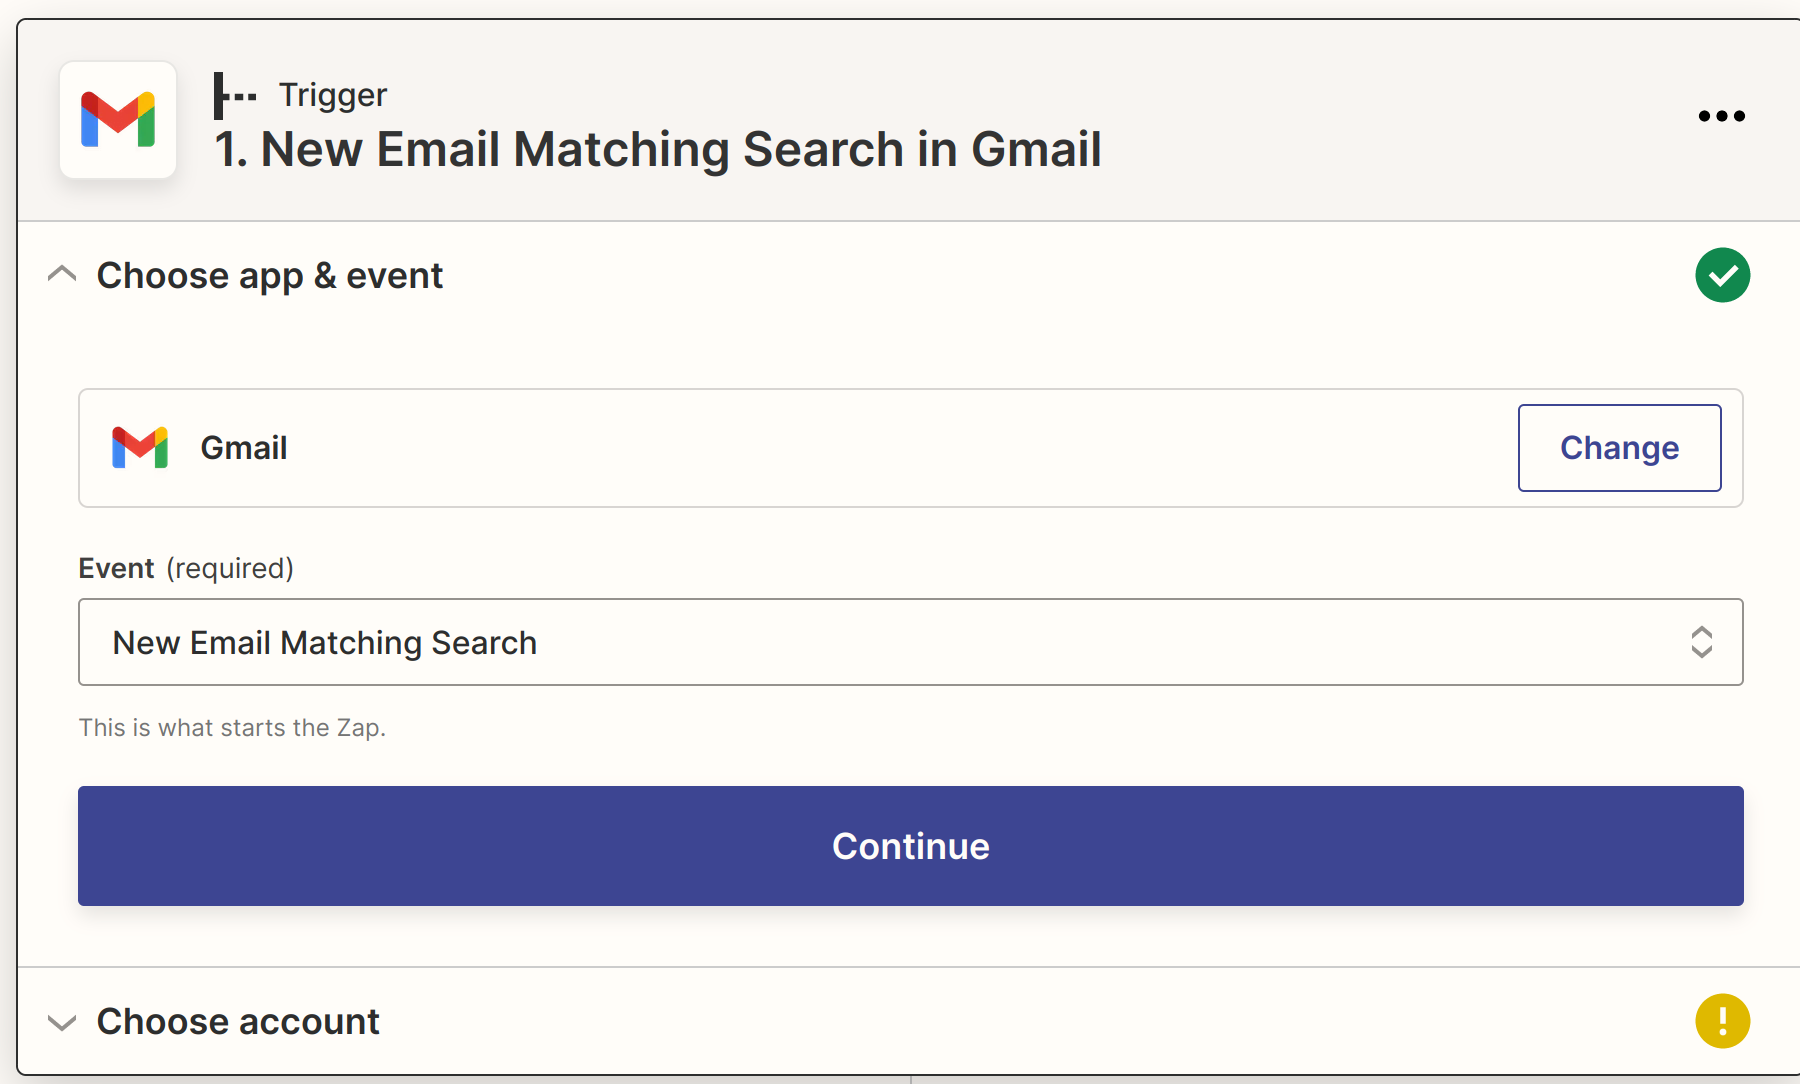 Choose App &quot;Gmail&quot; and event &quot;New Email Matching Search&quot;